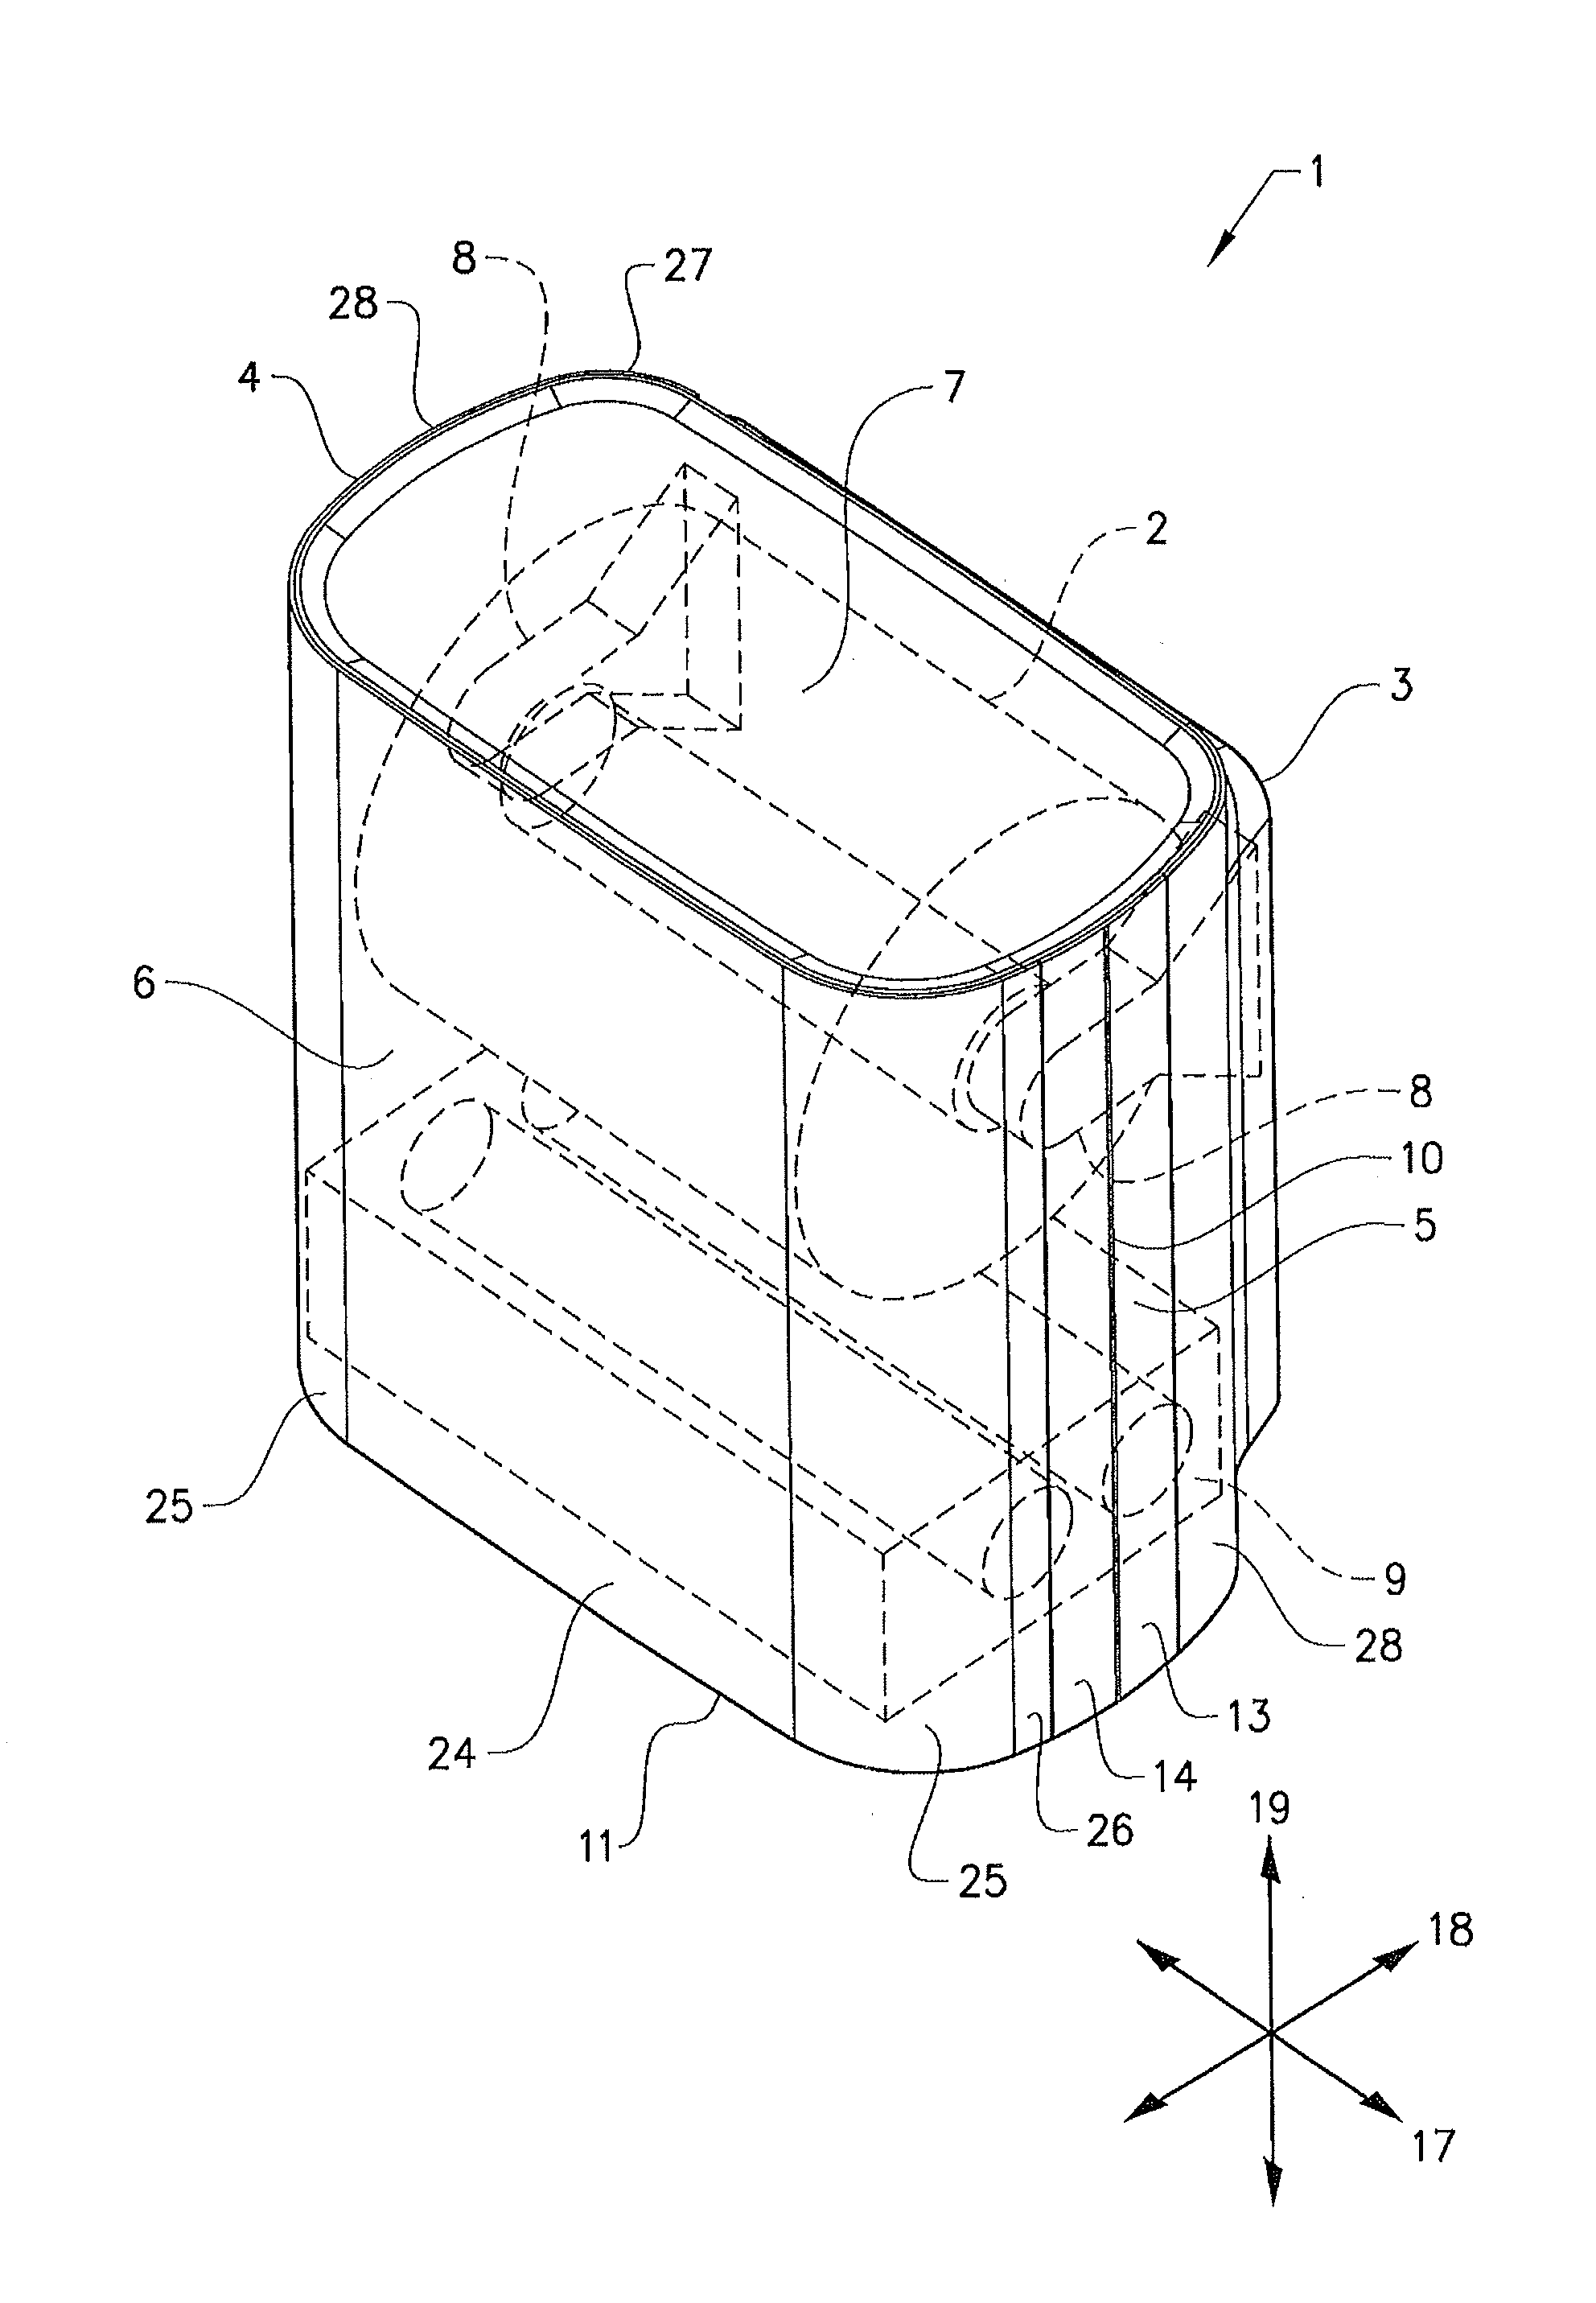 Dispenser for storing and dispensing hygiene products